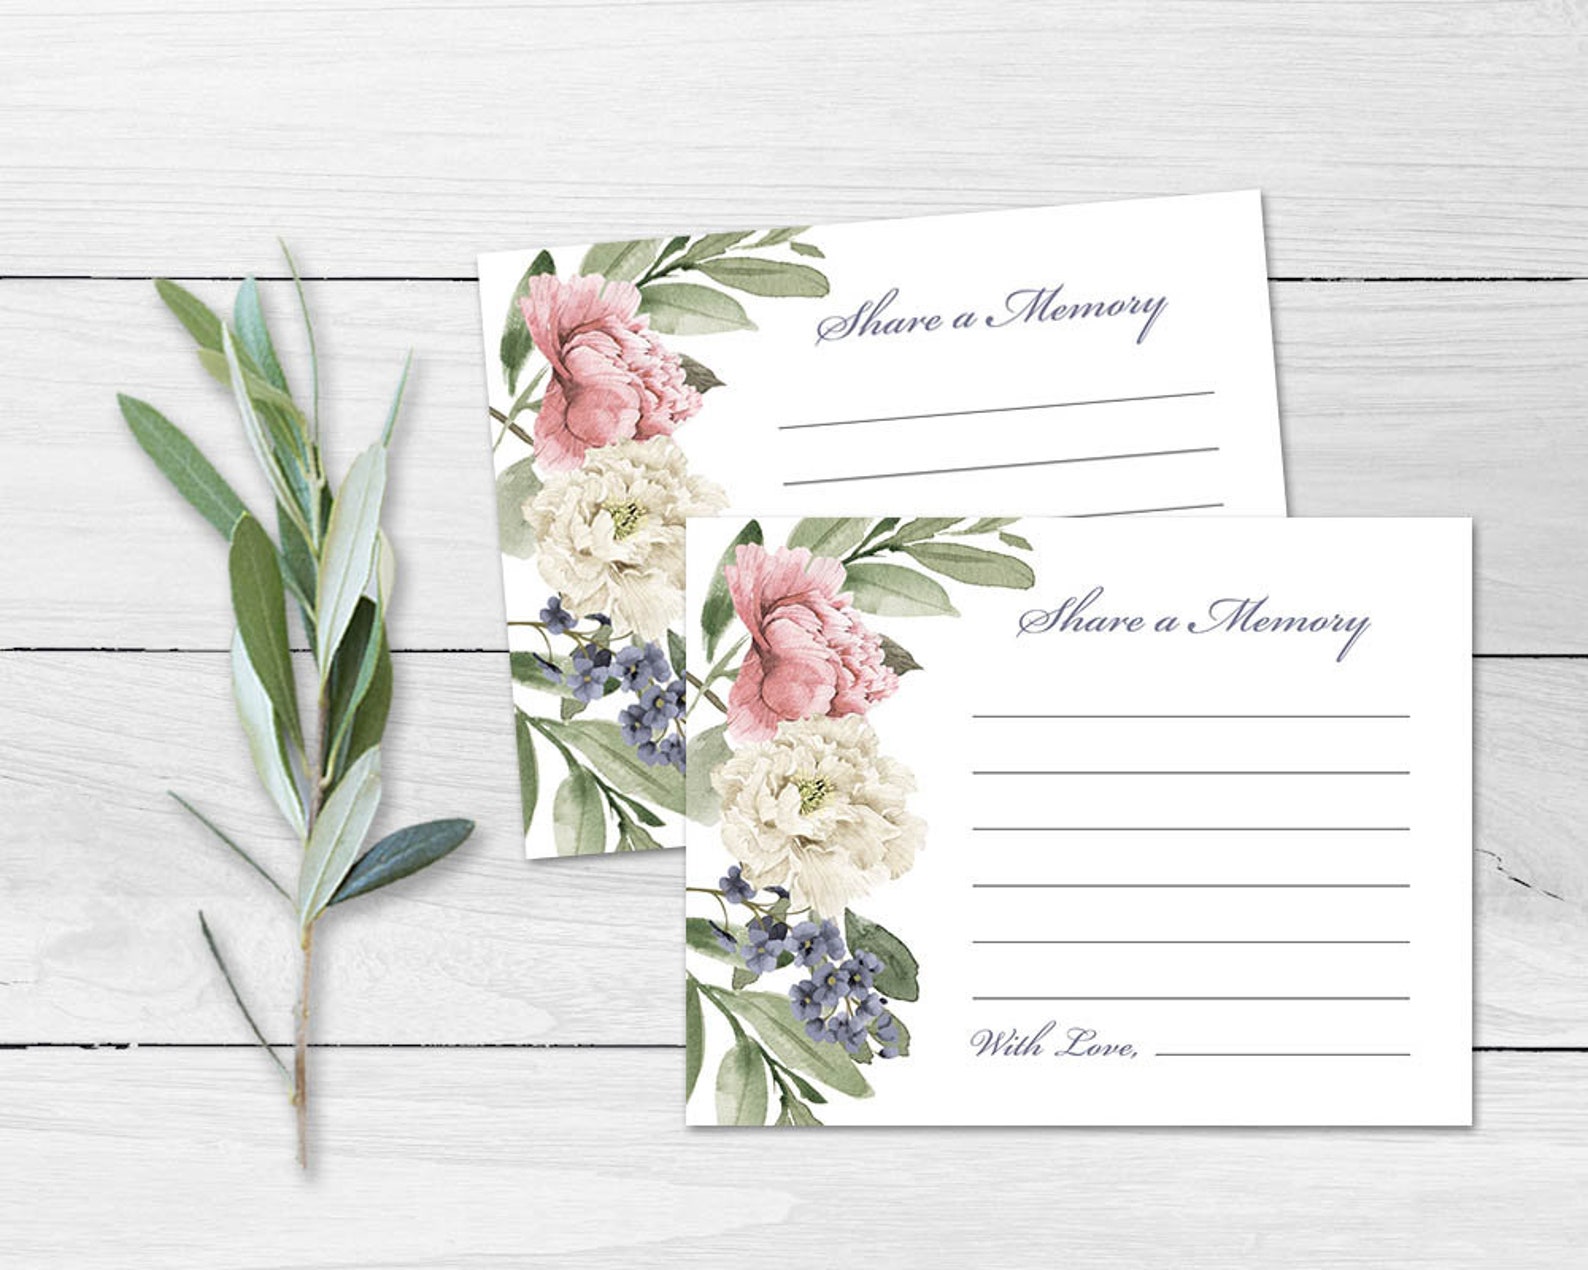 share a memory note card template